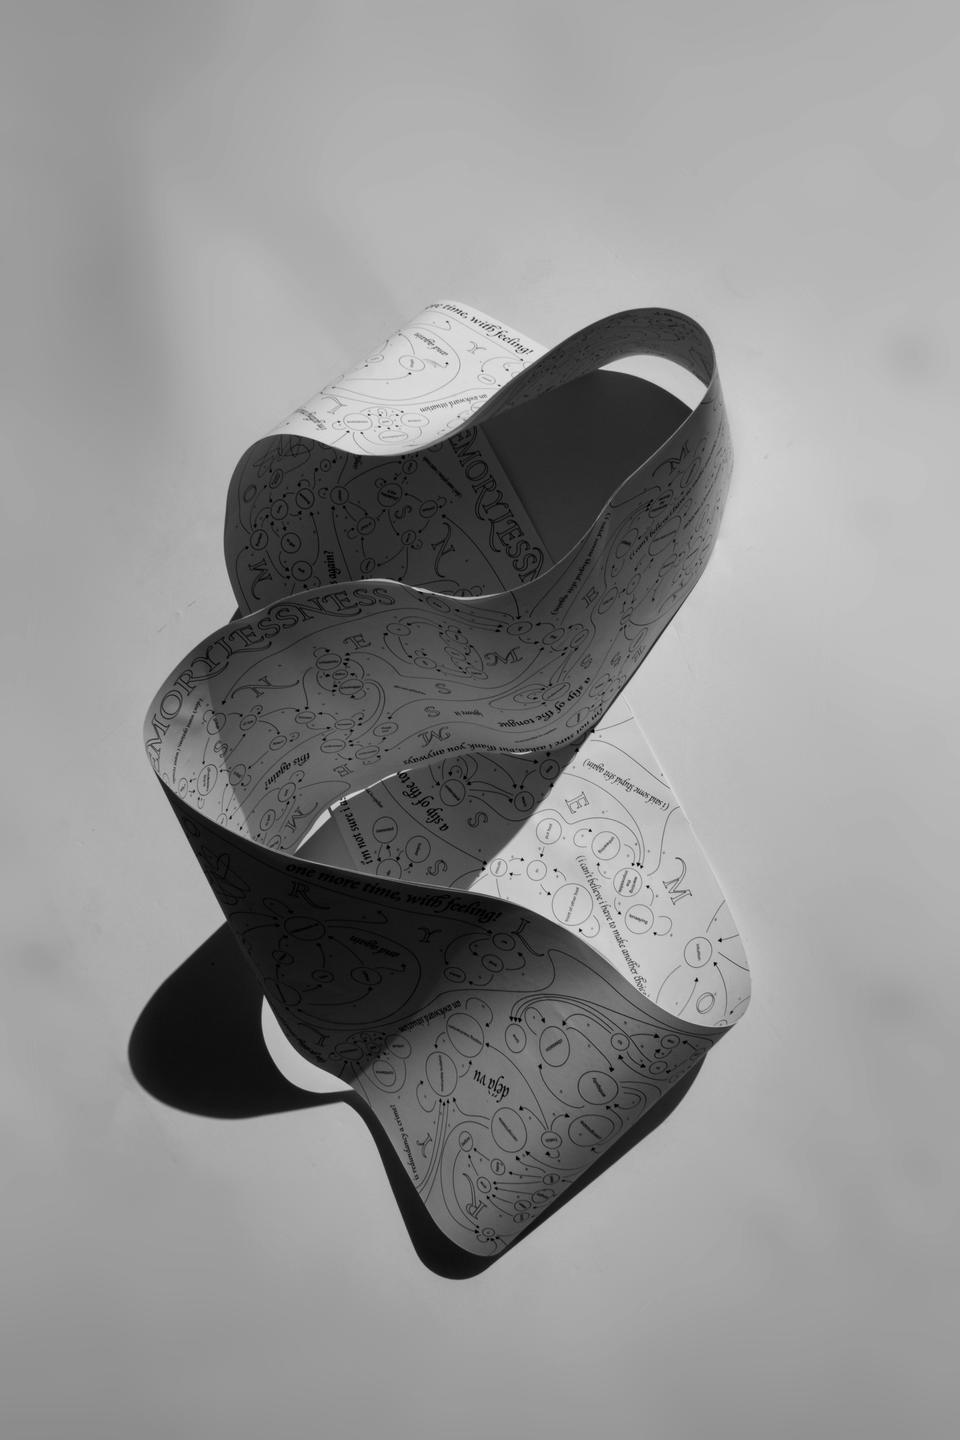 A paper mobius strip depicting illogical spiraling anxiety and neurosis using the graphical form of a Markov chain.